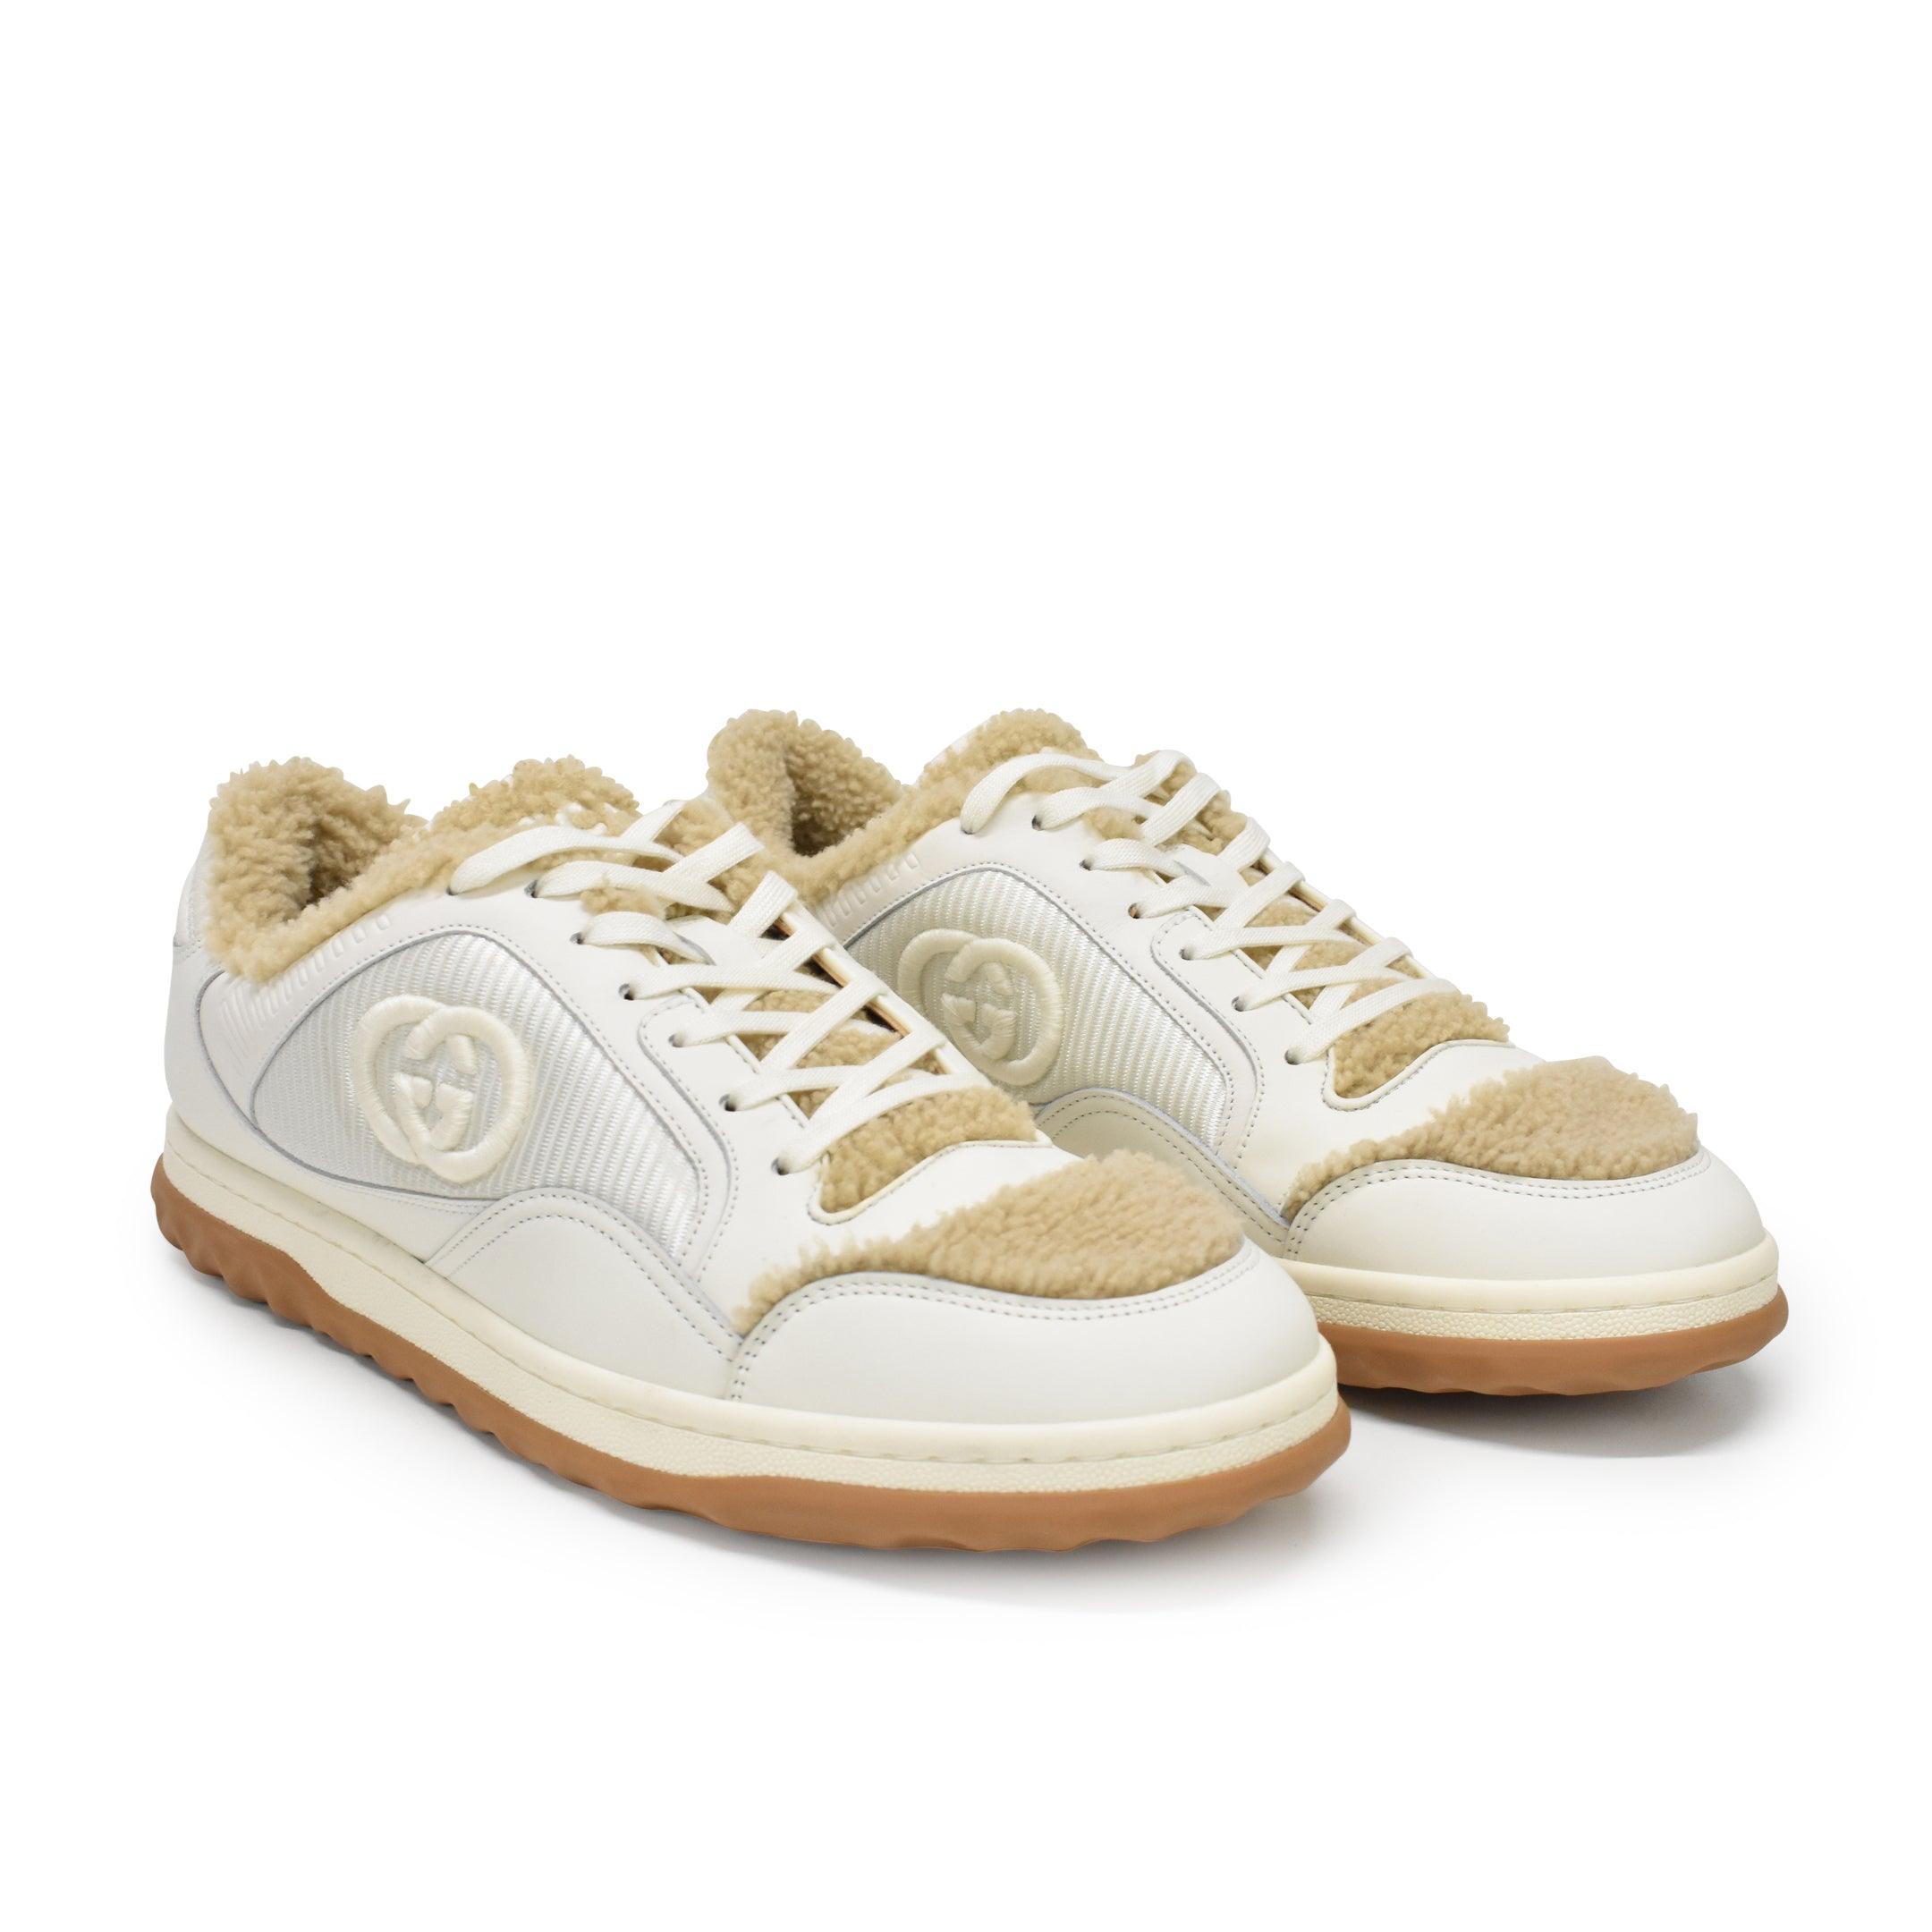 Gucci 'MAC80' Sneakers - Men's 10.5 - Fashionably Yours